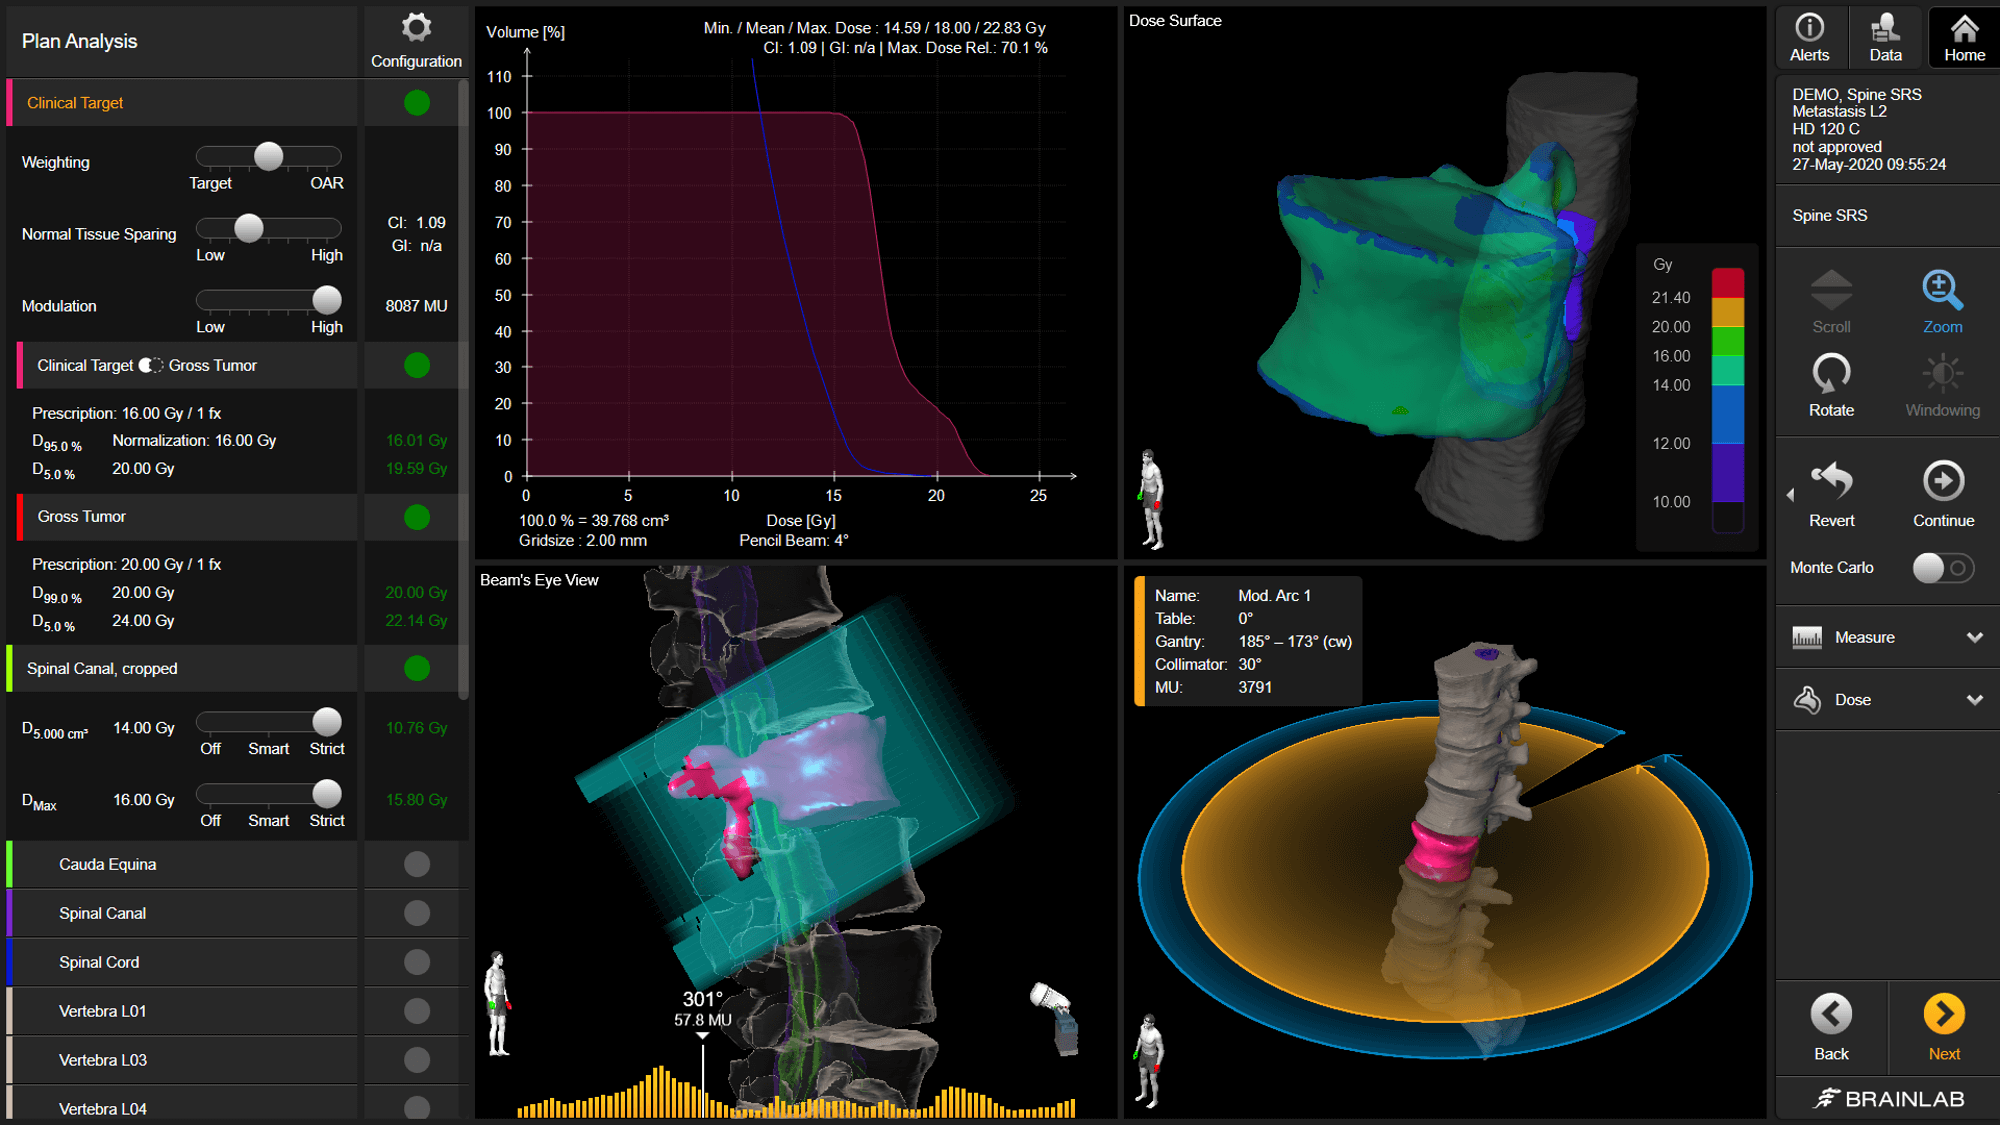 Software screenshot of Elements Spine SRS and the various tools it provides to visualize the dose created for a radiotherapy plan.